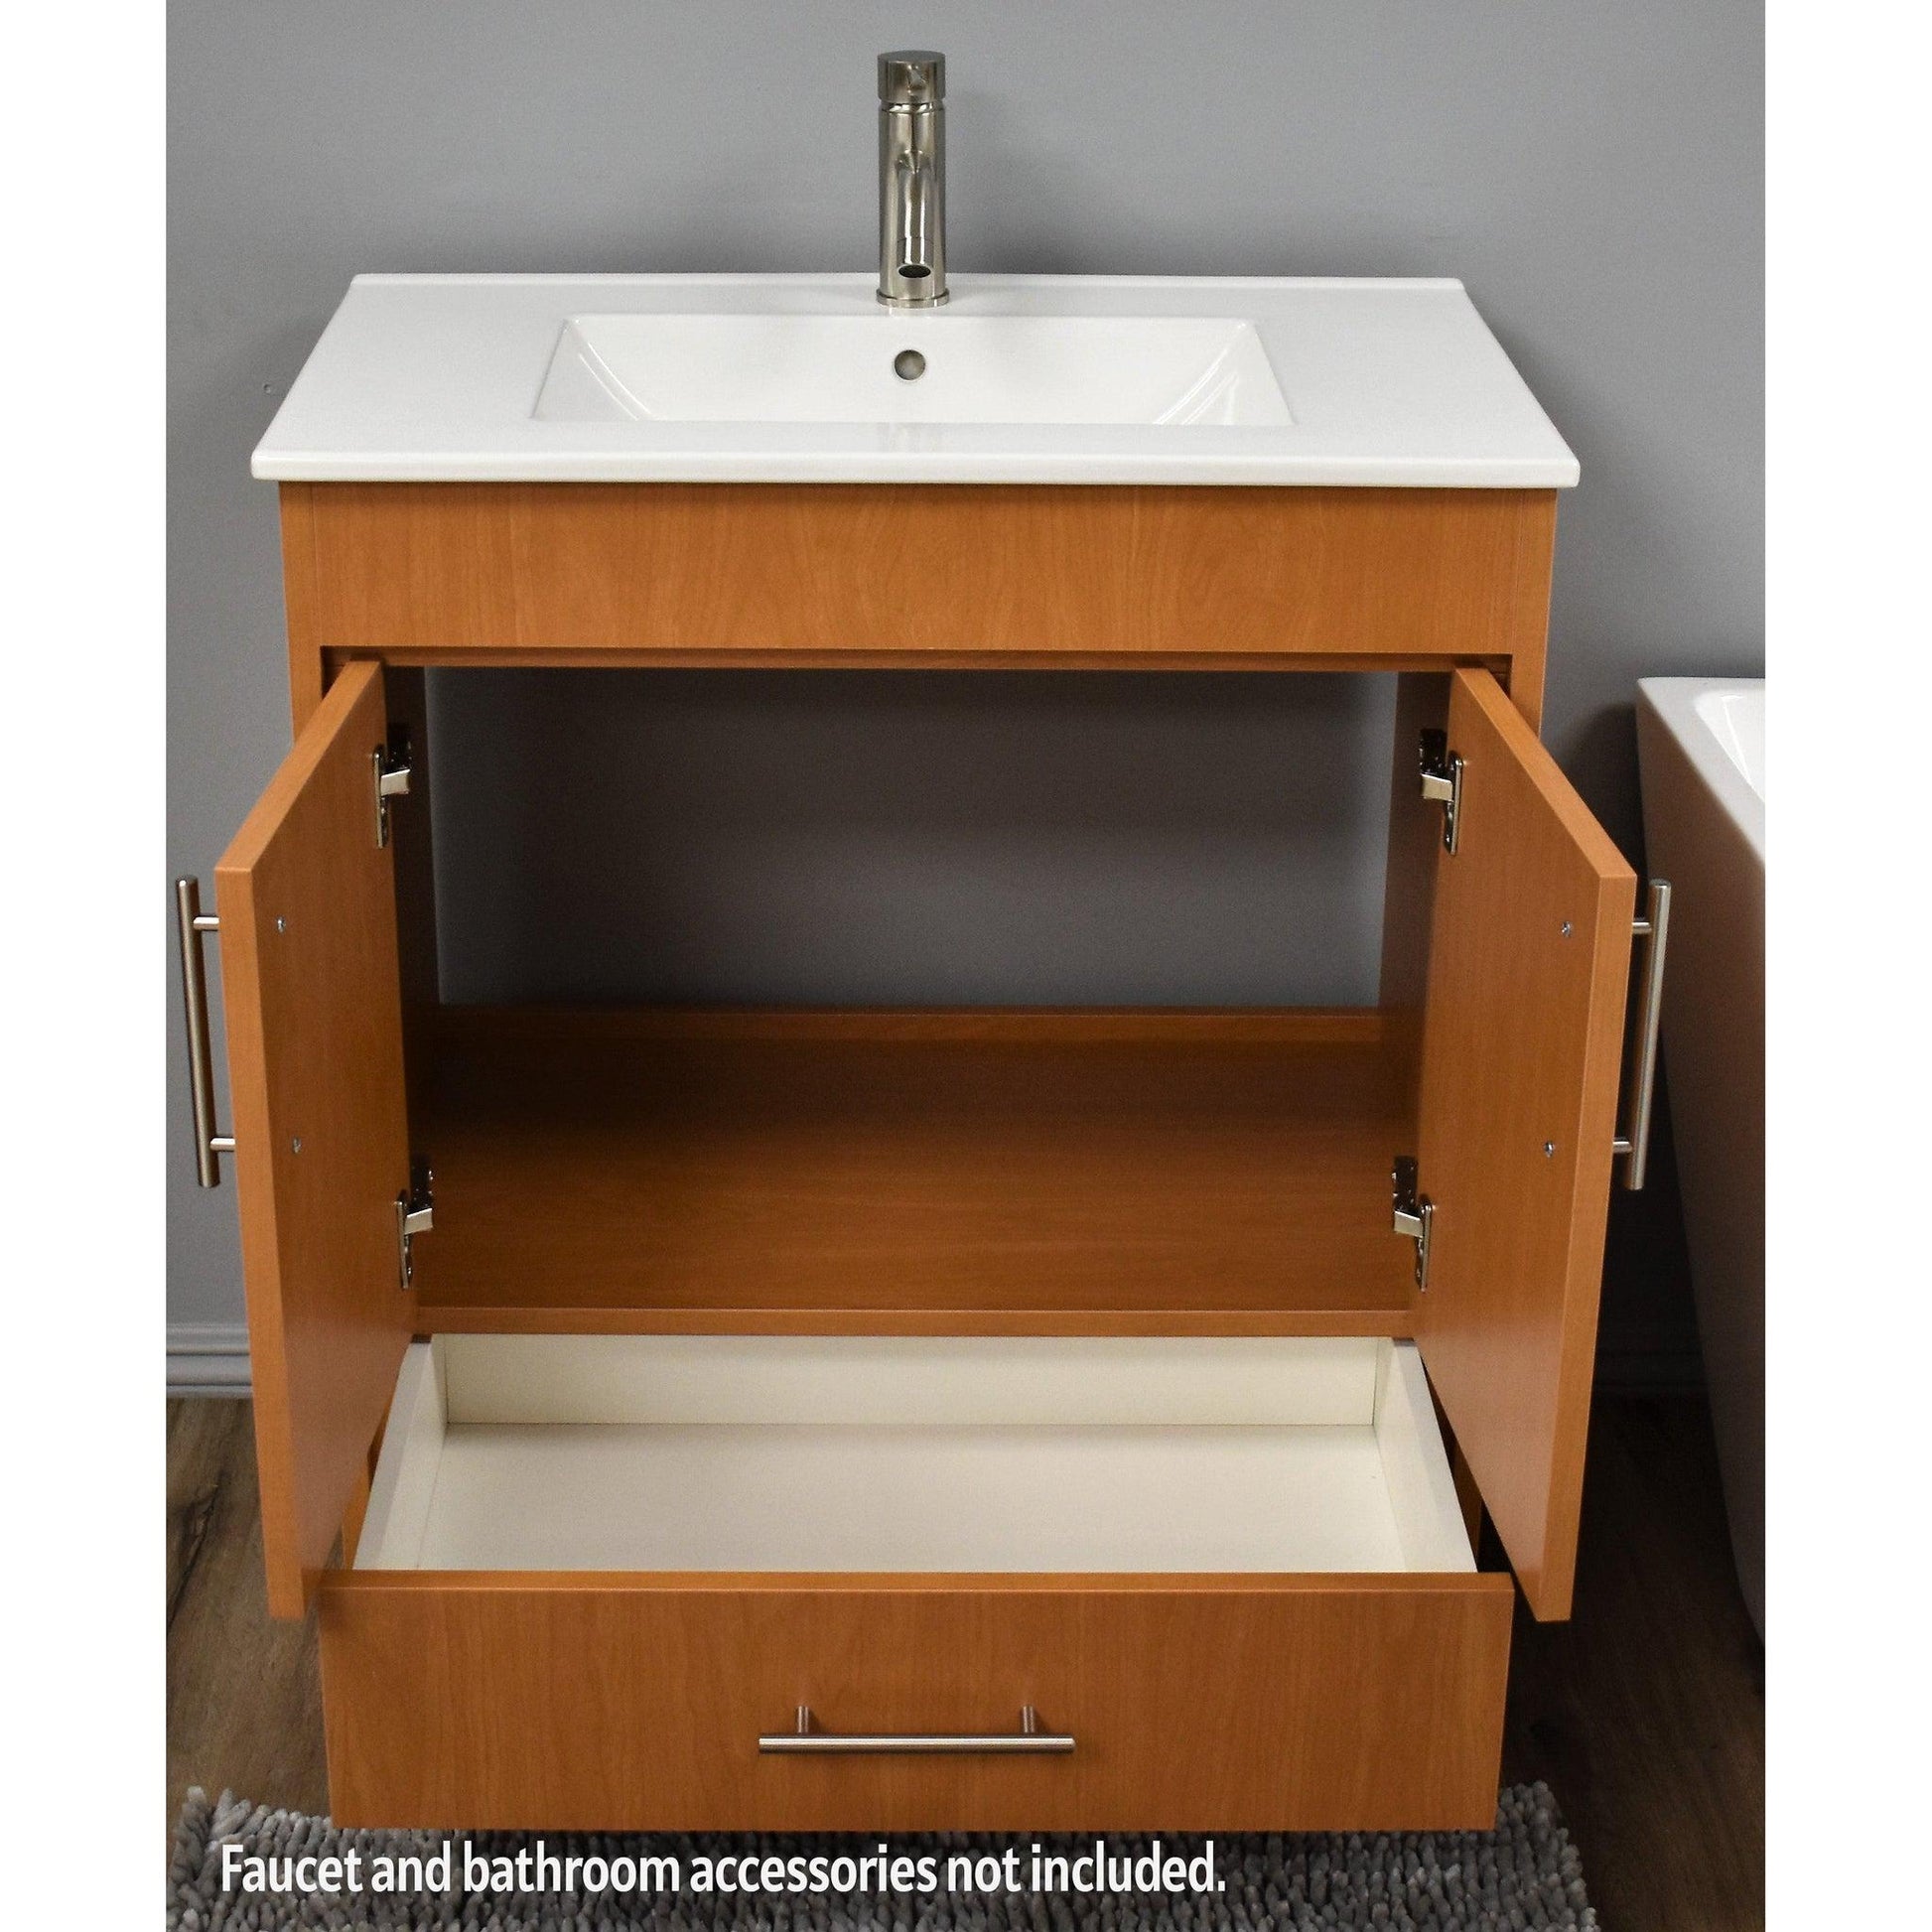 Volpa USA Pacific 30" Honey Maple Freestanding Modern Bathroom Vanity With Integrated Ceramic Top and Brushed Nickel Round Handles